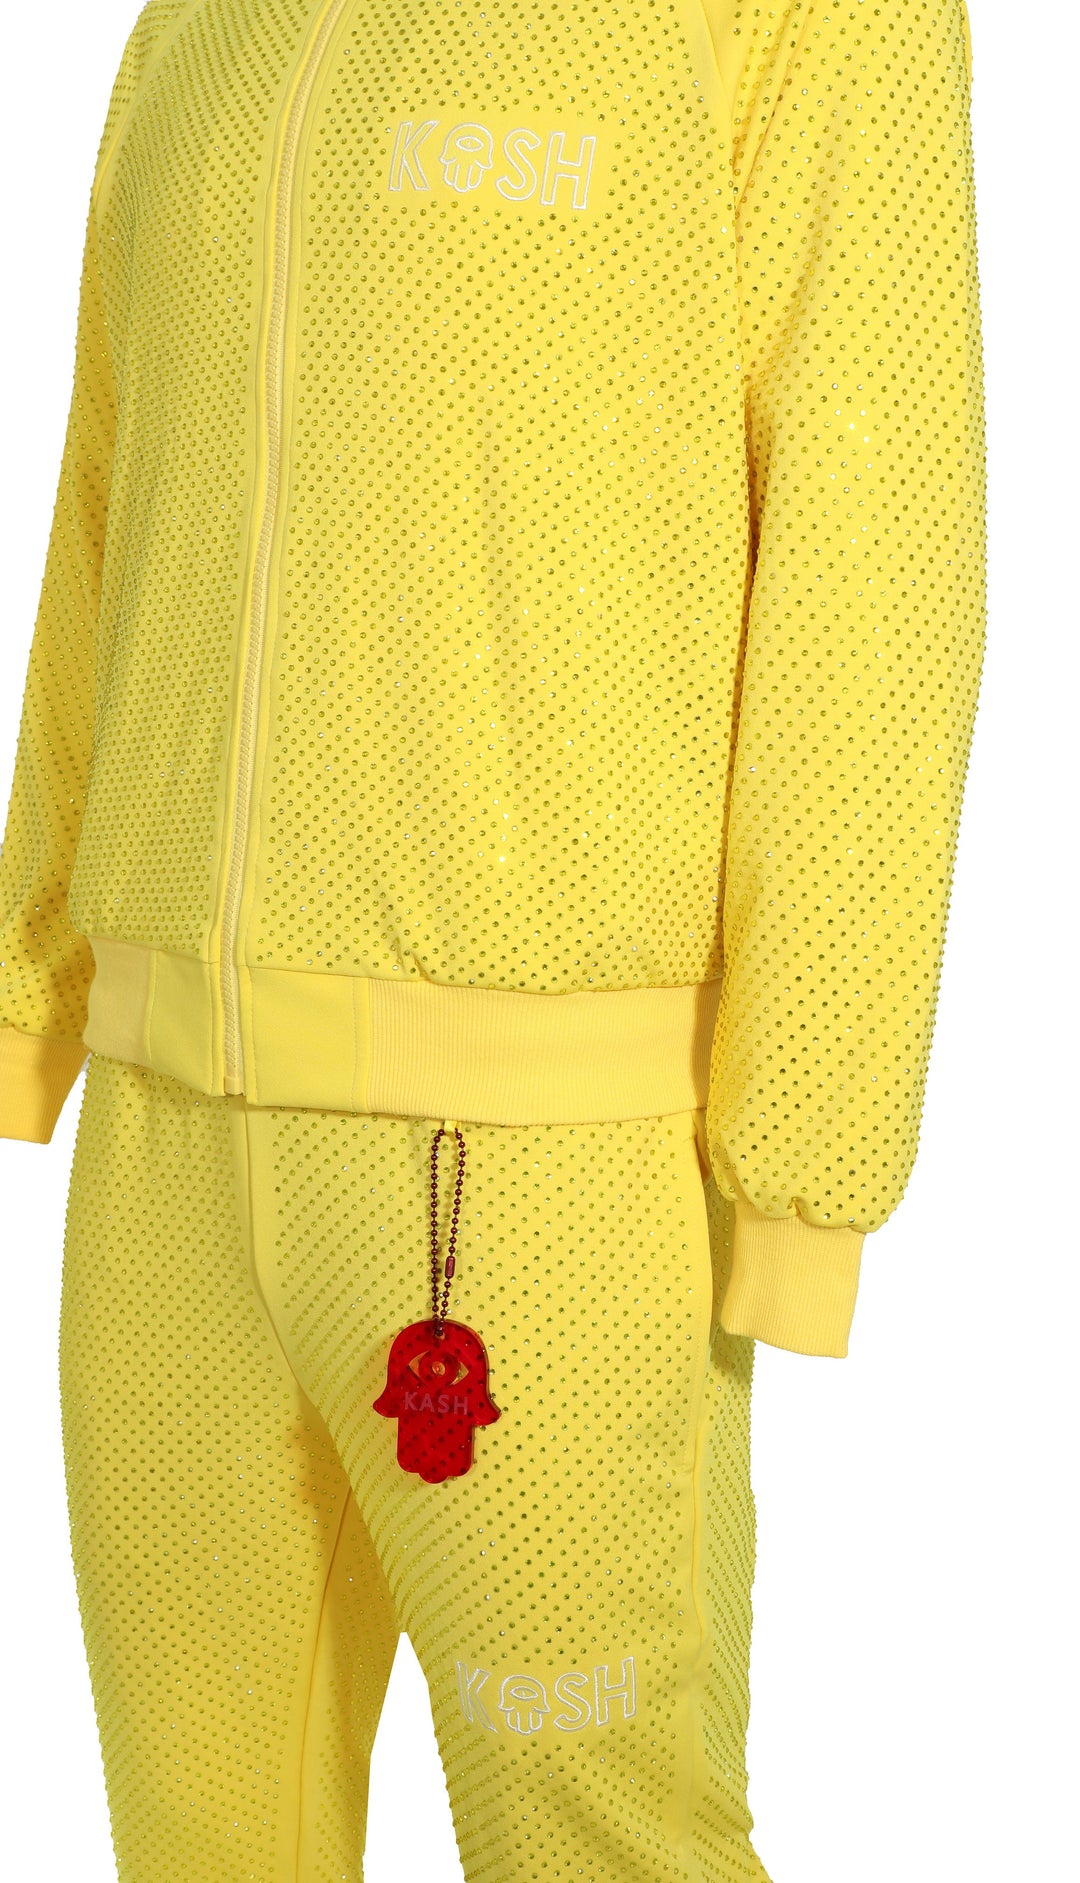 Kash All Over Diamond Track Pants Elastic Waistband Drawstring closure Color: Yellow 100% Polyester Wrinkle Free Material Fits true to size